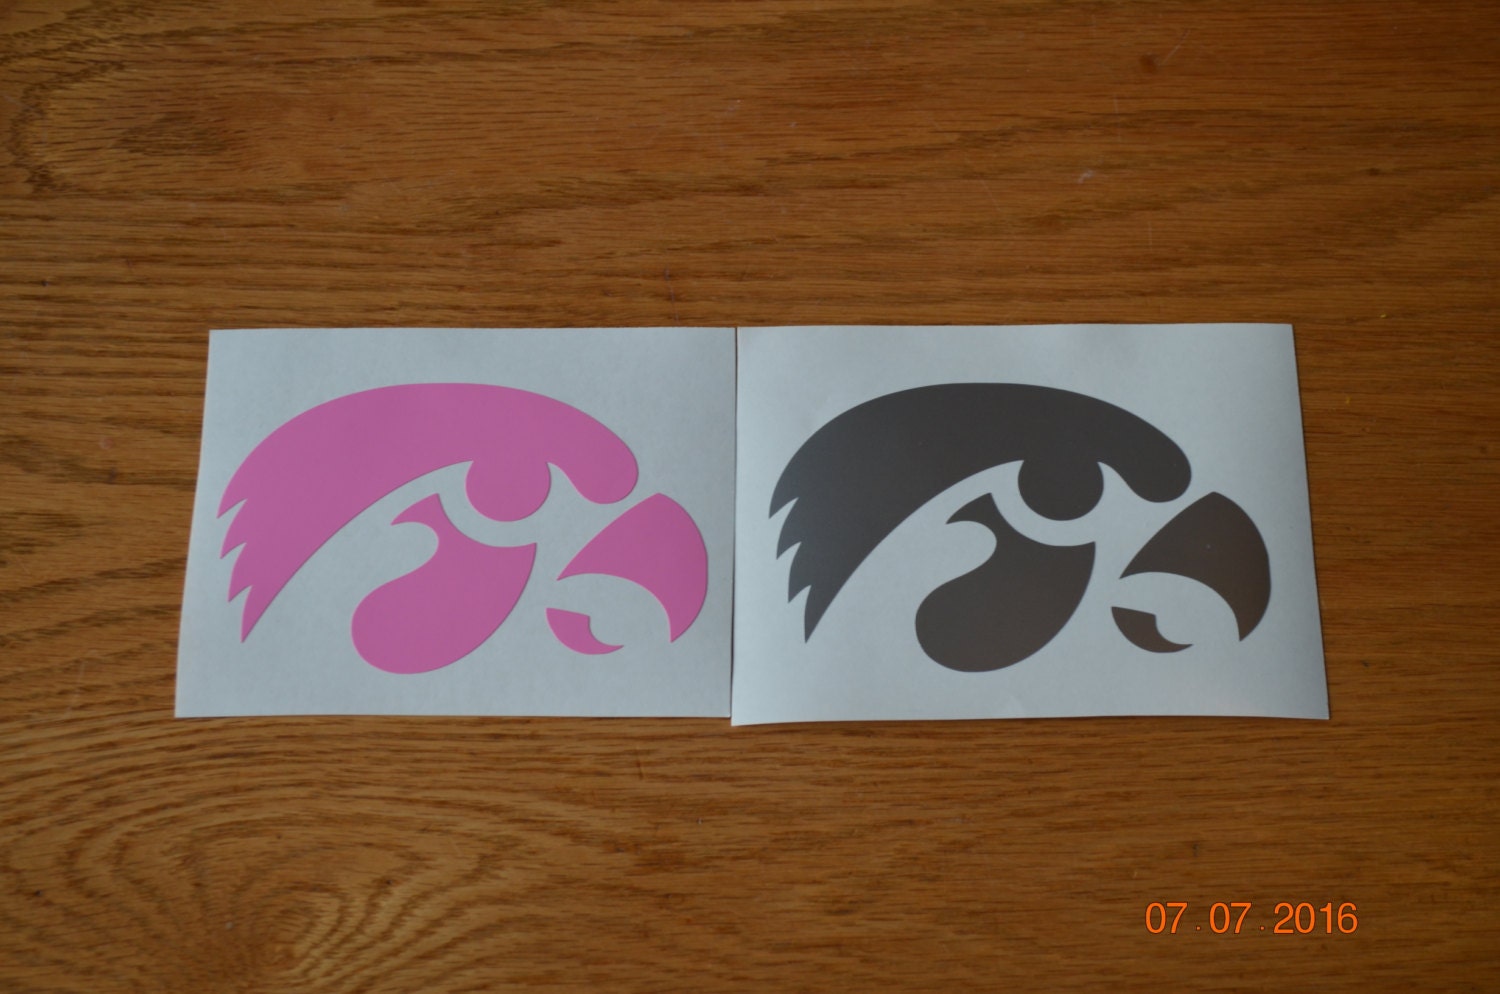 Iowa Hawkeyes 4 Inch Vinyl Mascot Decal Sticker Officially Licensed  Collegiate Product